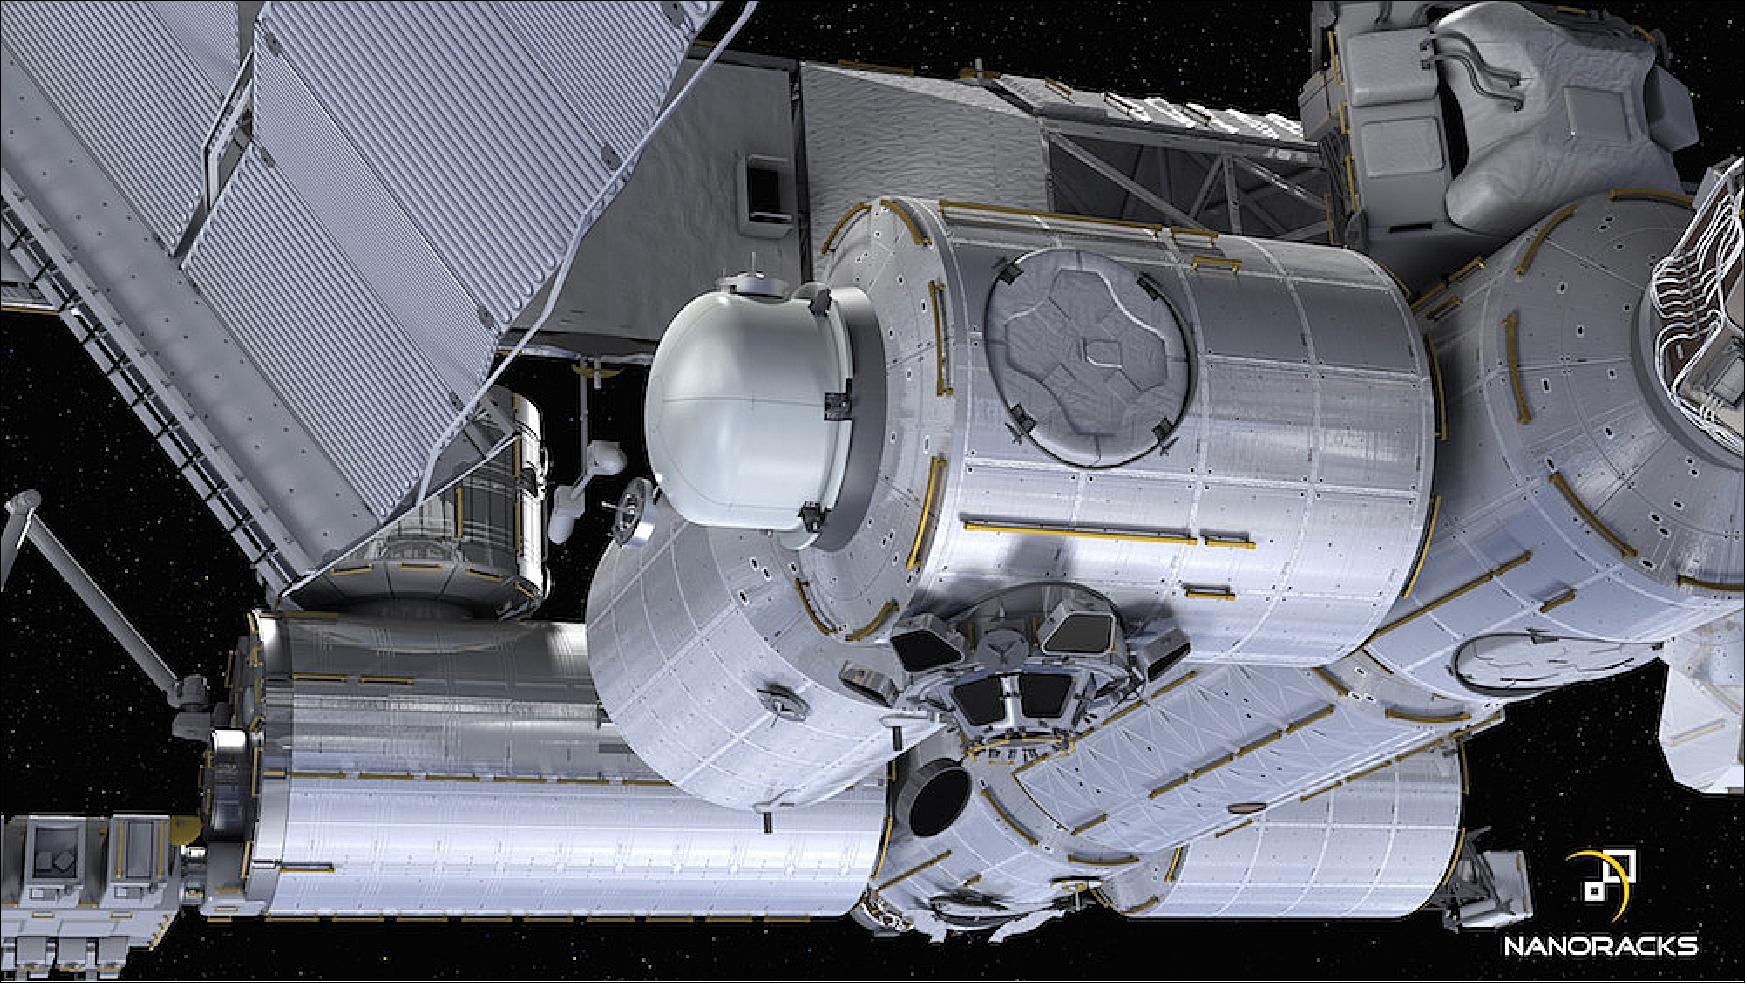 Figure 1: Artists concept of the first commercially funded airlock on the space station being developed by NanoRacks that will launch on a commercial resupply mission in 2020. It will be installed on the station’s Tranquility module, Node 3 Port (image credit: NanoRacks)